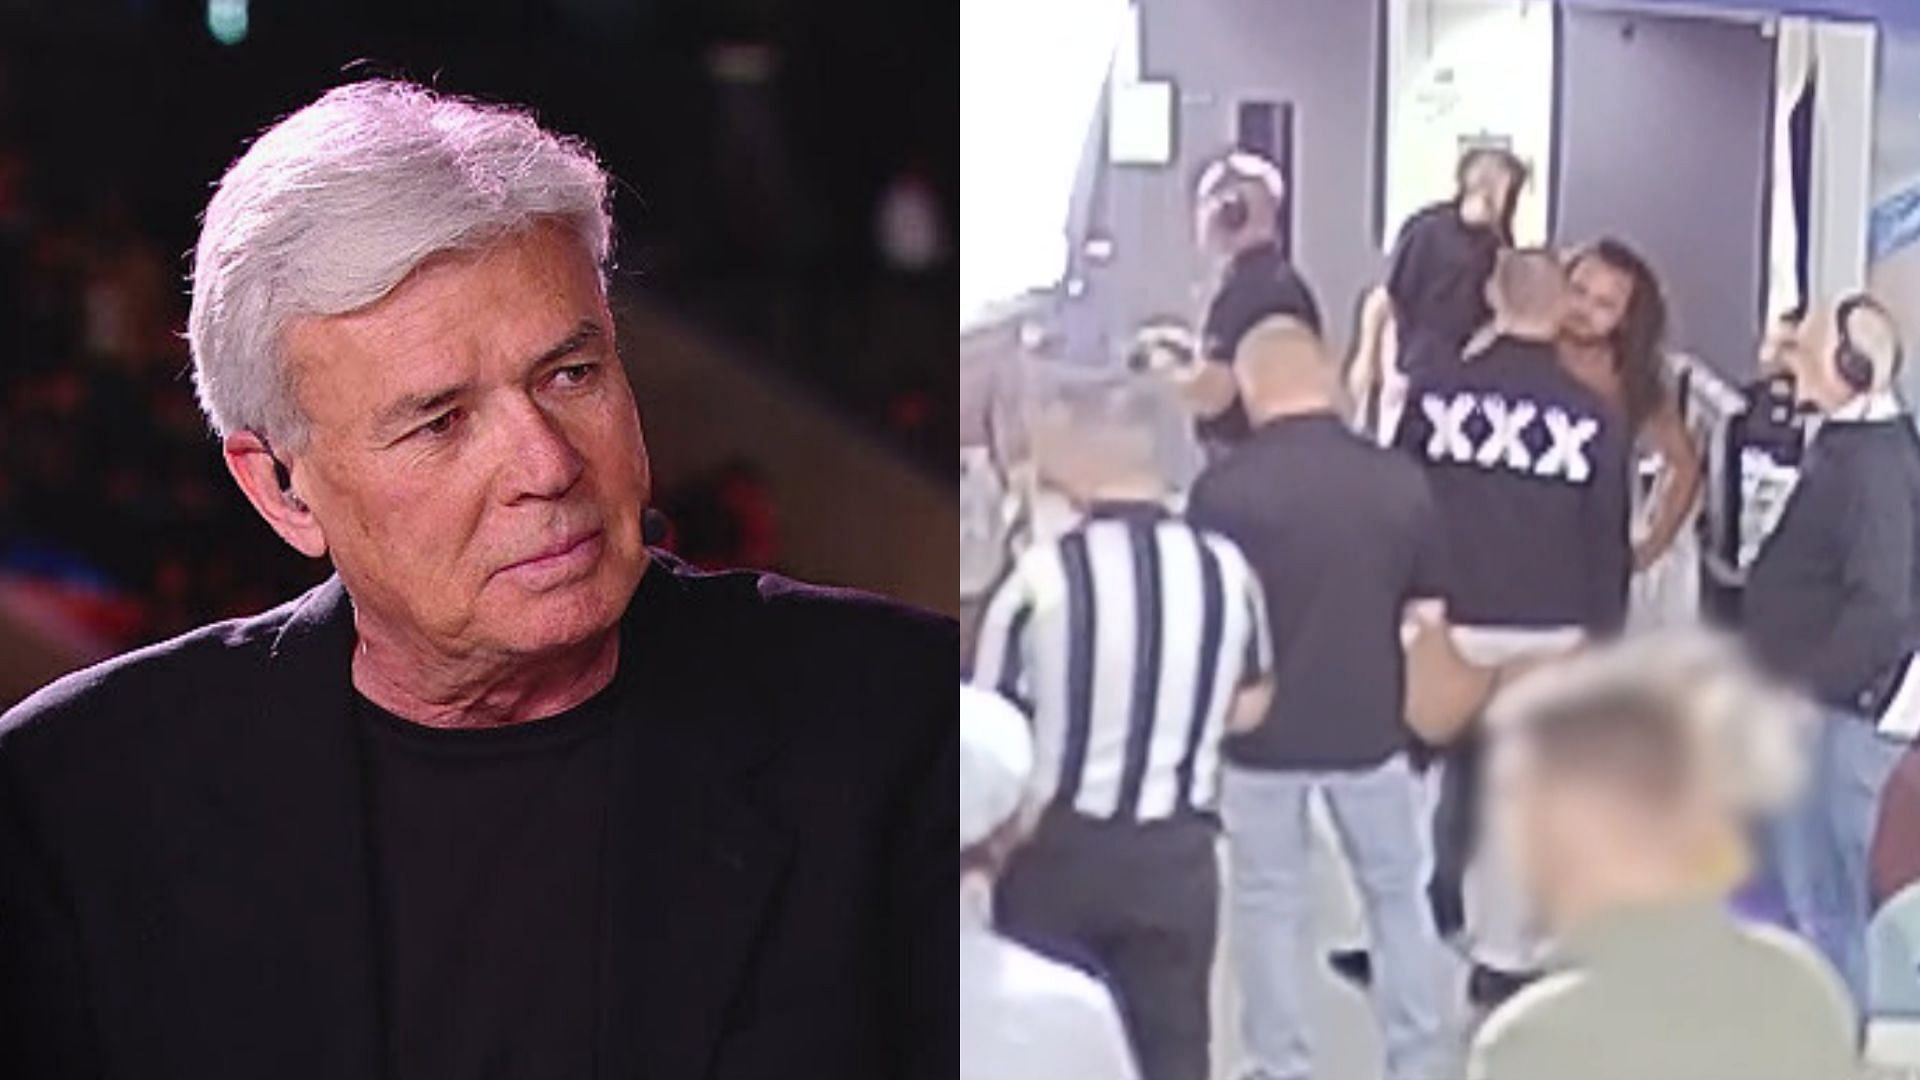 The former WWE manager reviewed the moment everyone has been talking about!